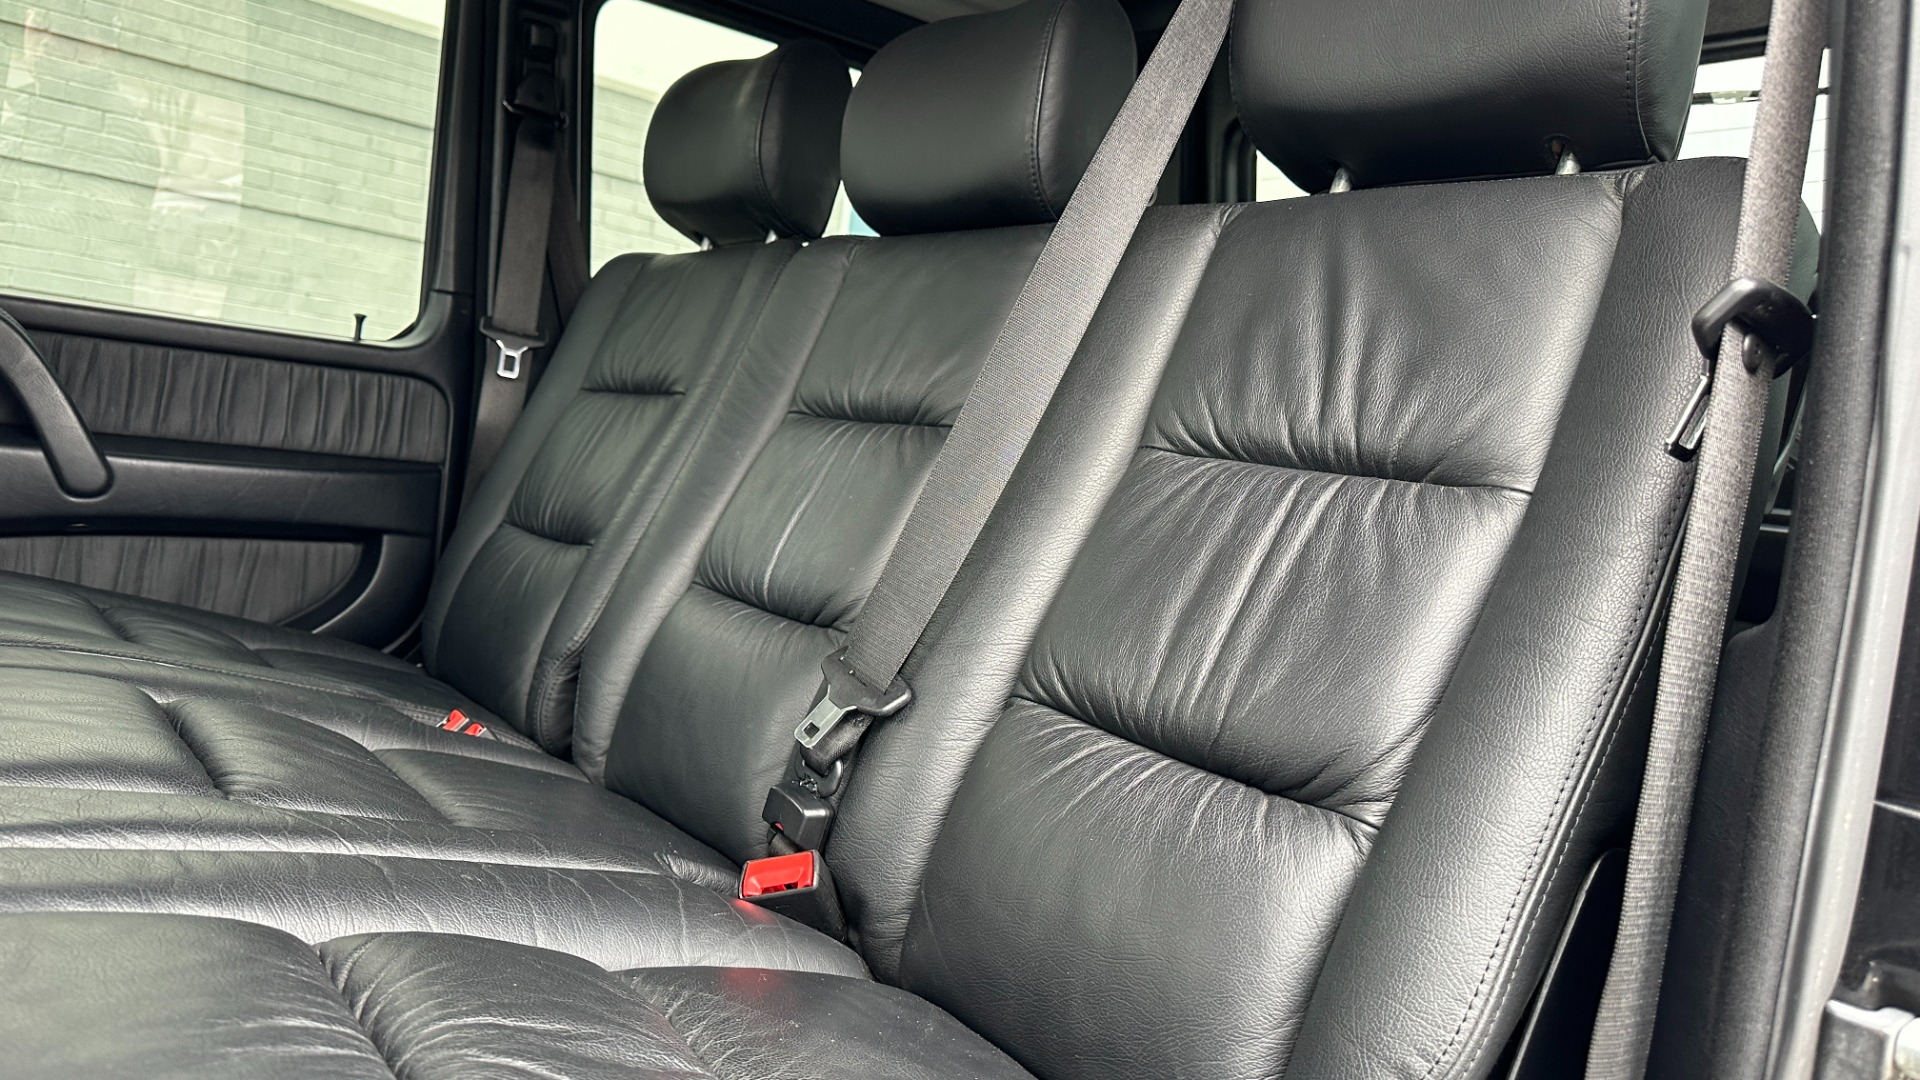 Used 2007 Mercedes-Benz G-Class G 550 V8 / LEATHER / 4MATIC / HEATED SEATING / MEMORY / BLACKOUT for sale $55,999 at Formula Imports in Charlotte NC 28227 18